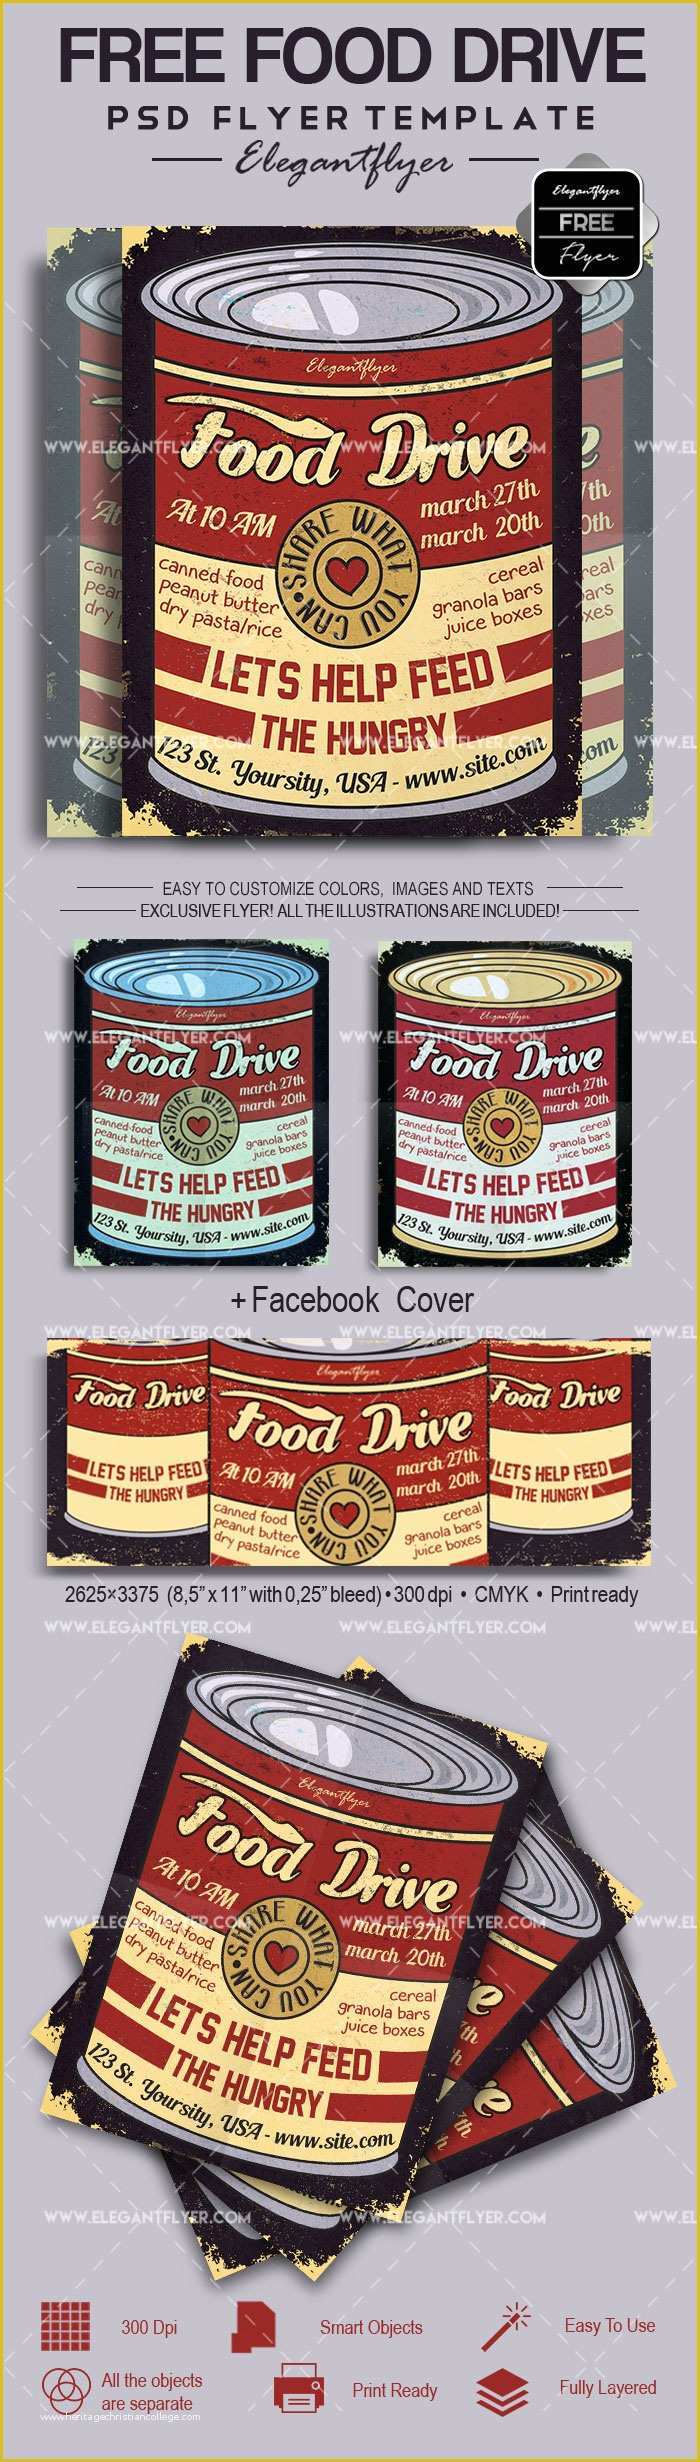 Free Can Food Drive Flyer Template Of Food Drive – Free Flyer Psd Template – by Elegantflyer